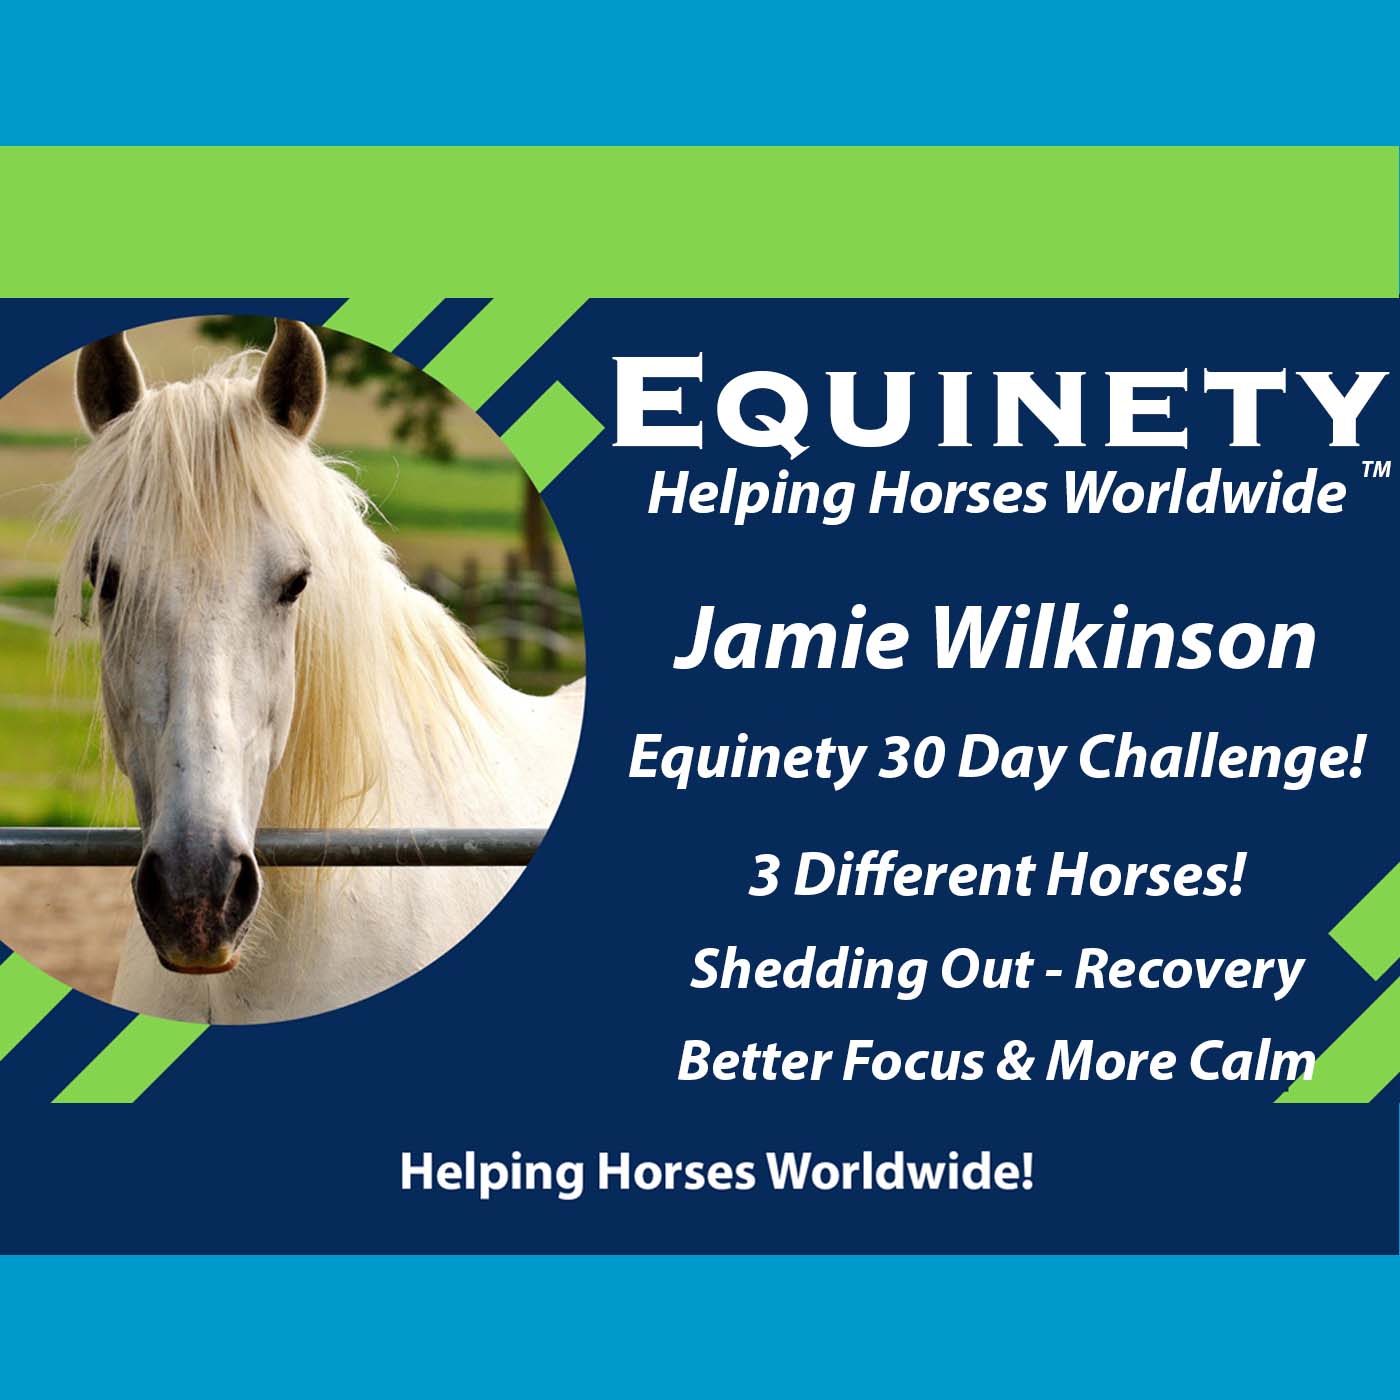 Jamie Wilkinson - Shedding - Recovery - Better Focus - More Calm